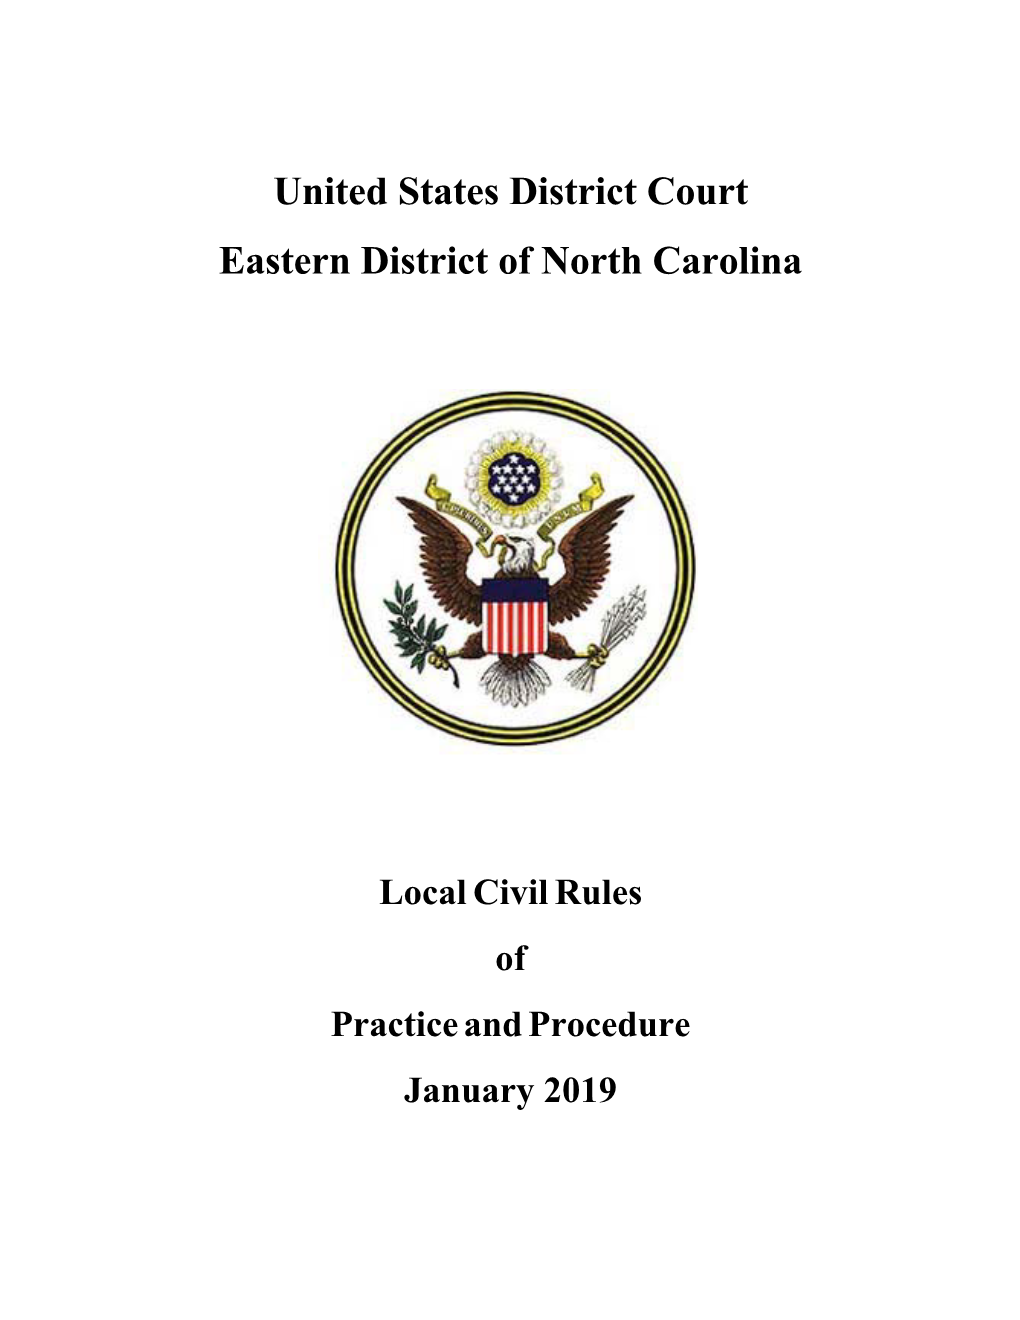 Local Civil Rules of Practice and Procedure January 2019 Local Civil Rules – U.S